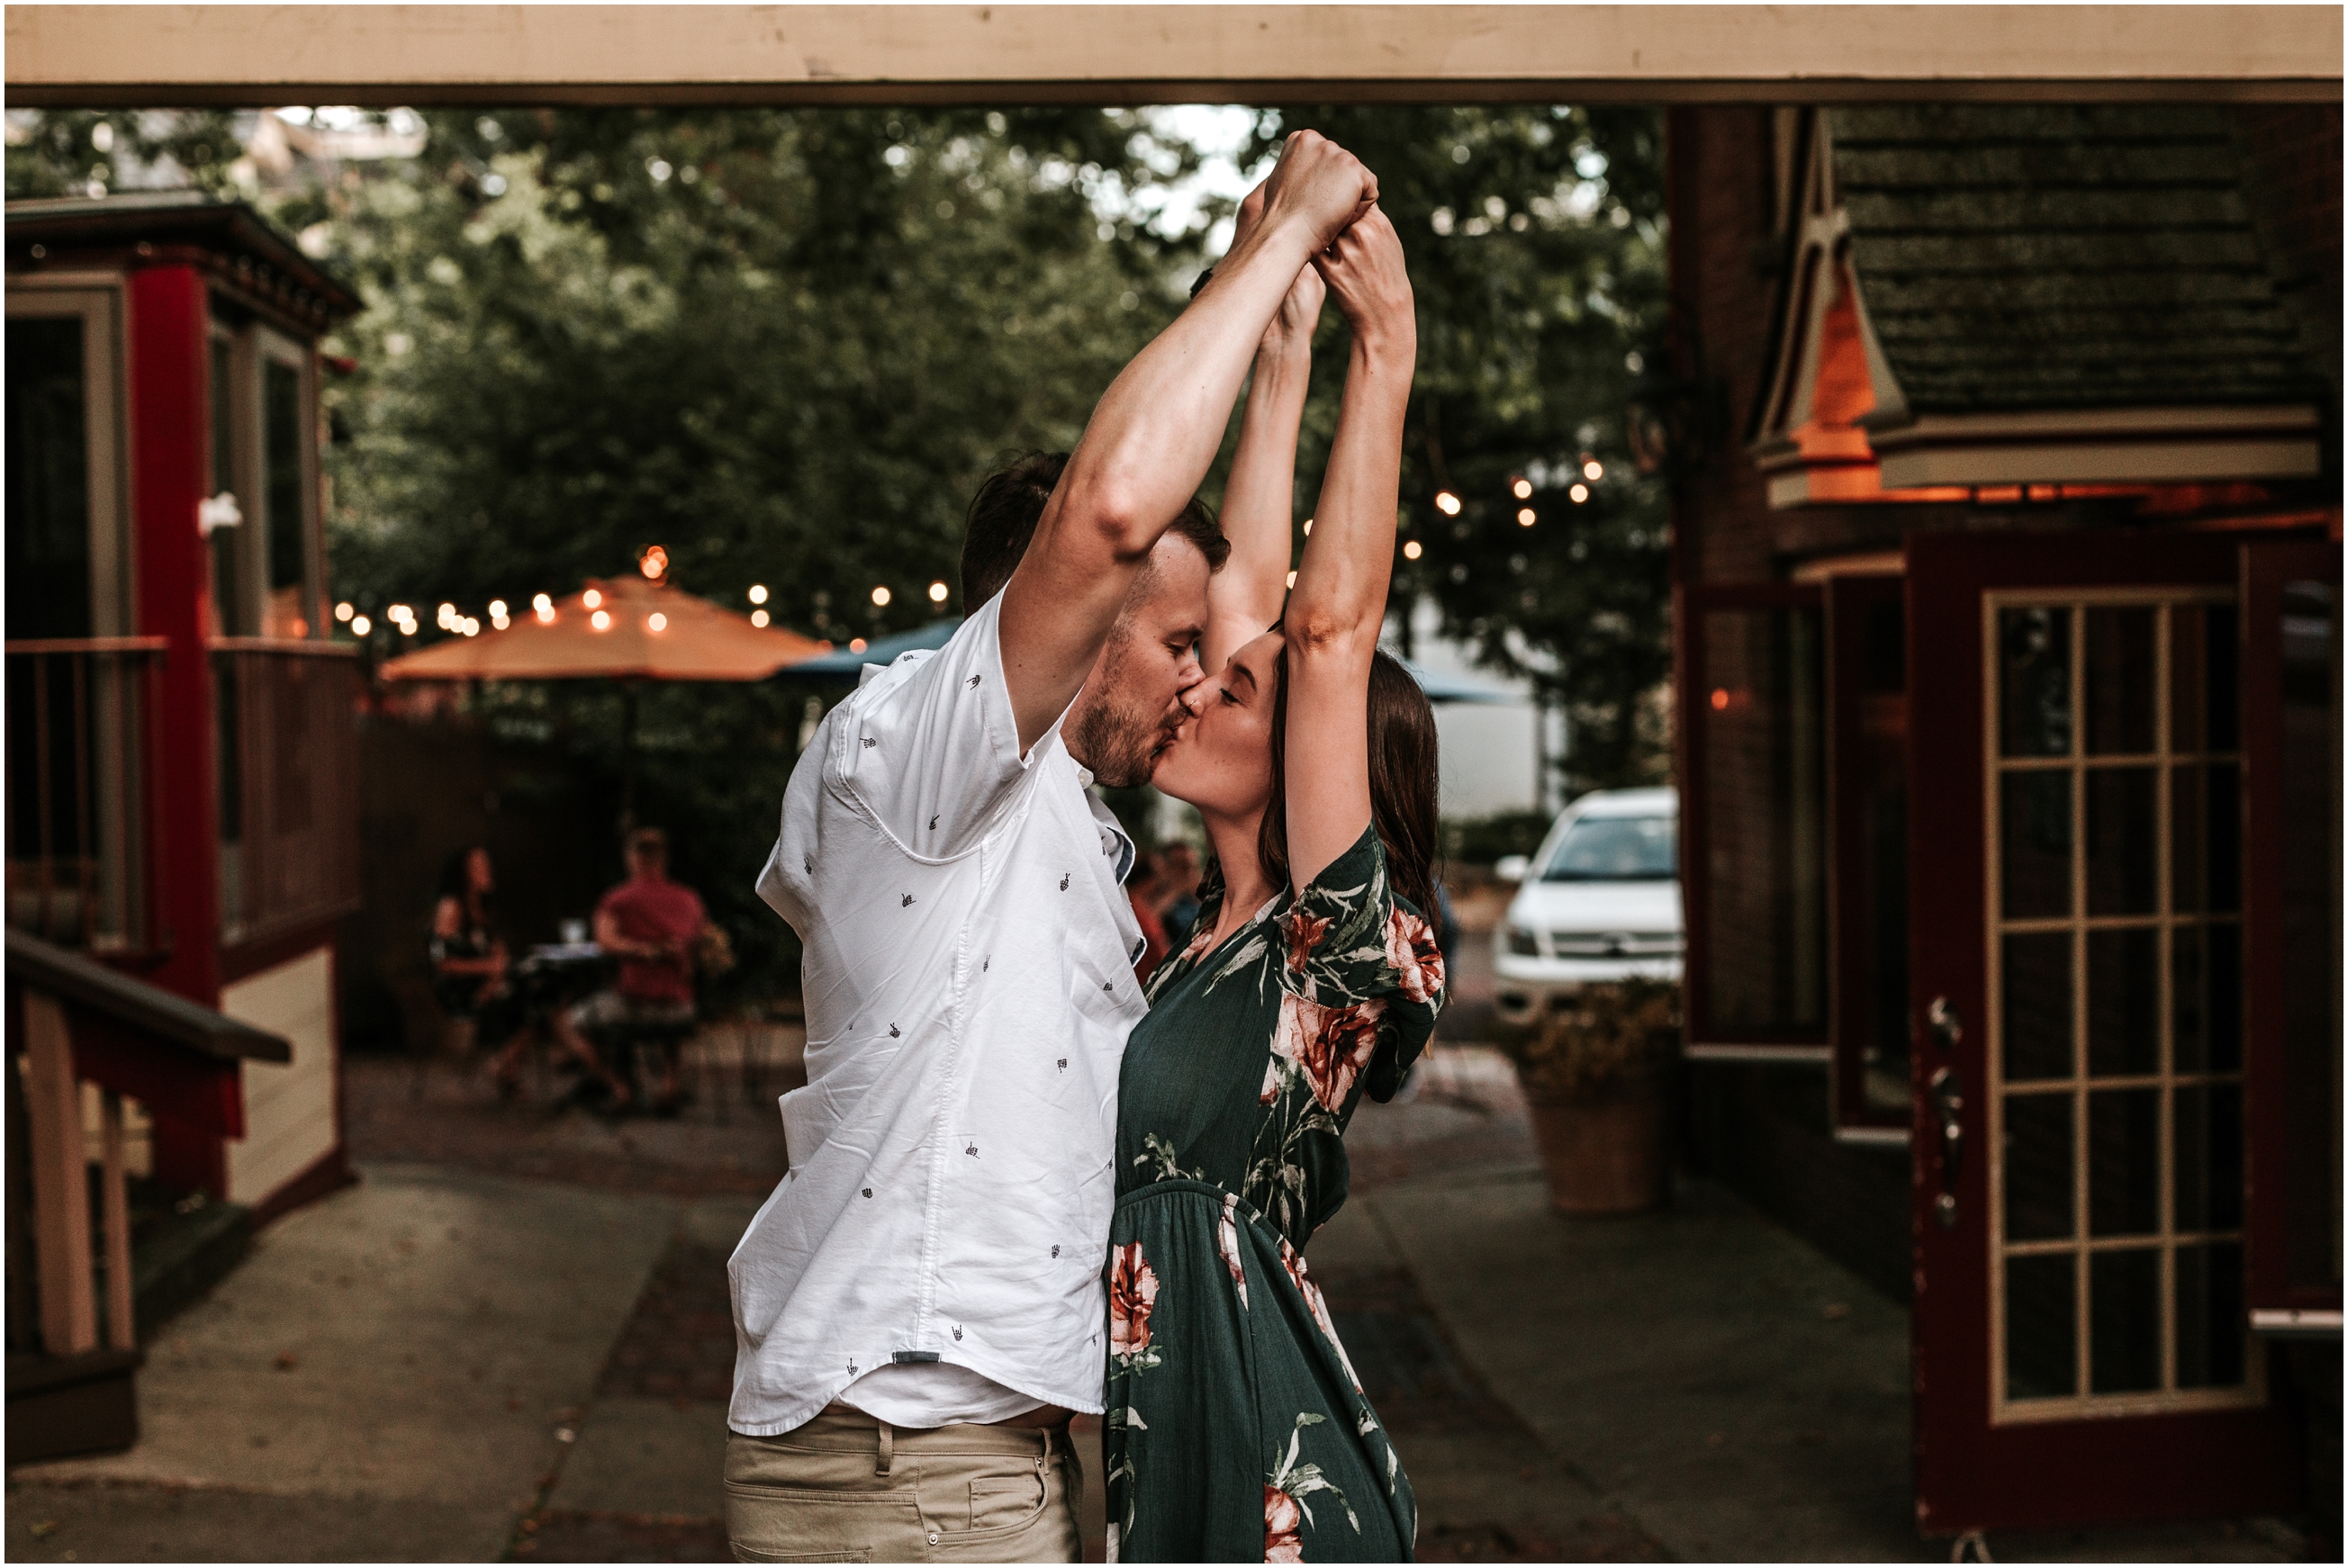 Sellersville Doylestown Pennsylvania In Home Pillow Fight Farm Engagement Session New Jersey Wedding Photographer